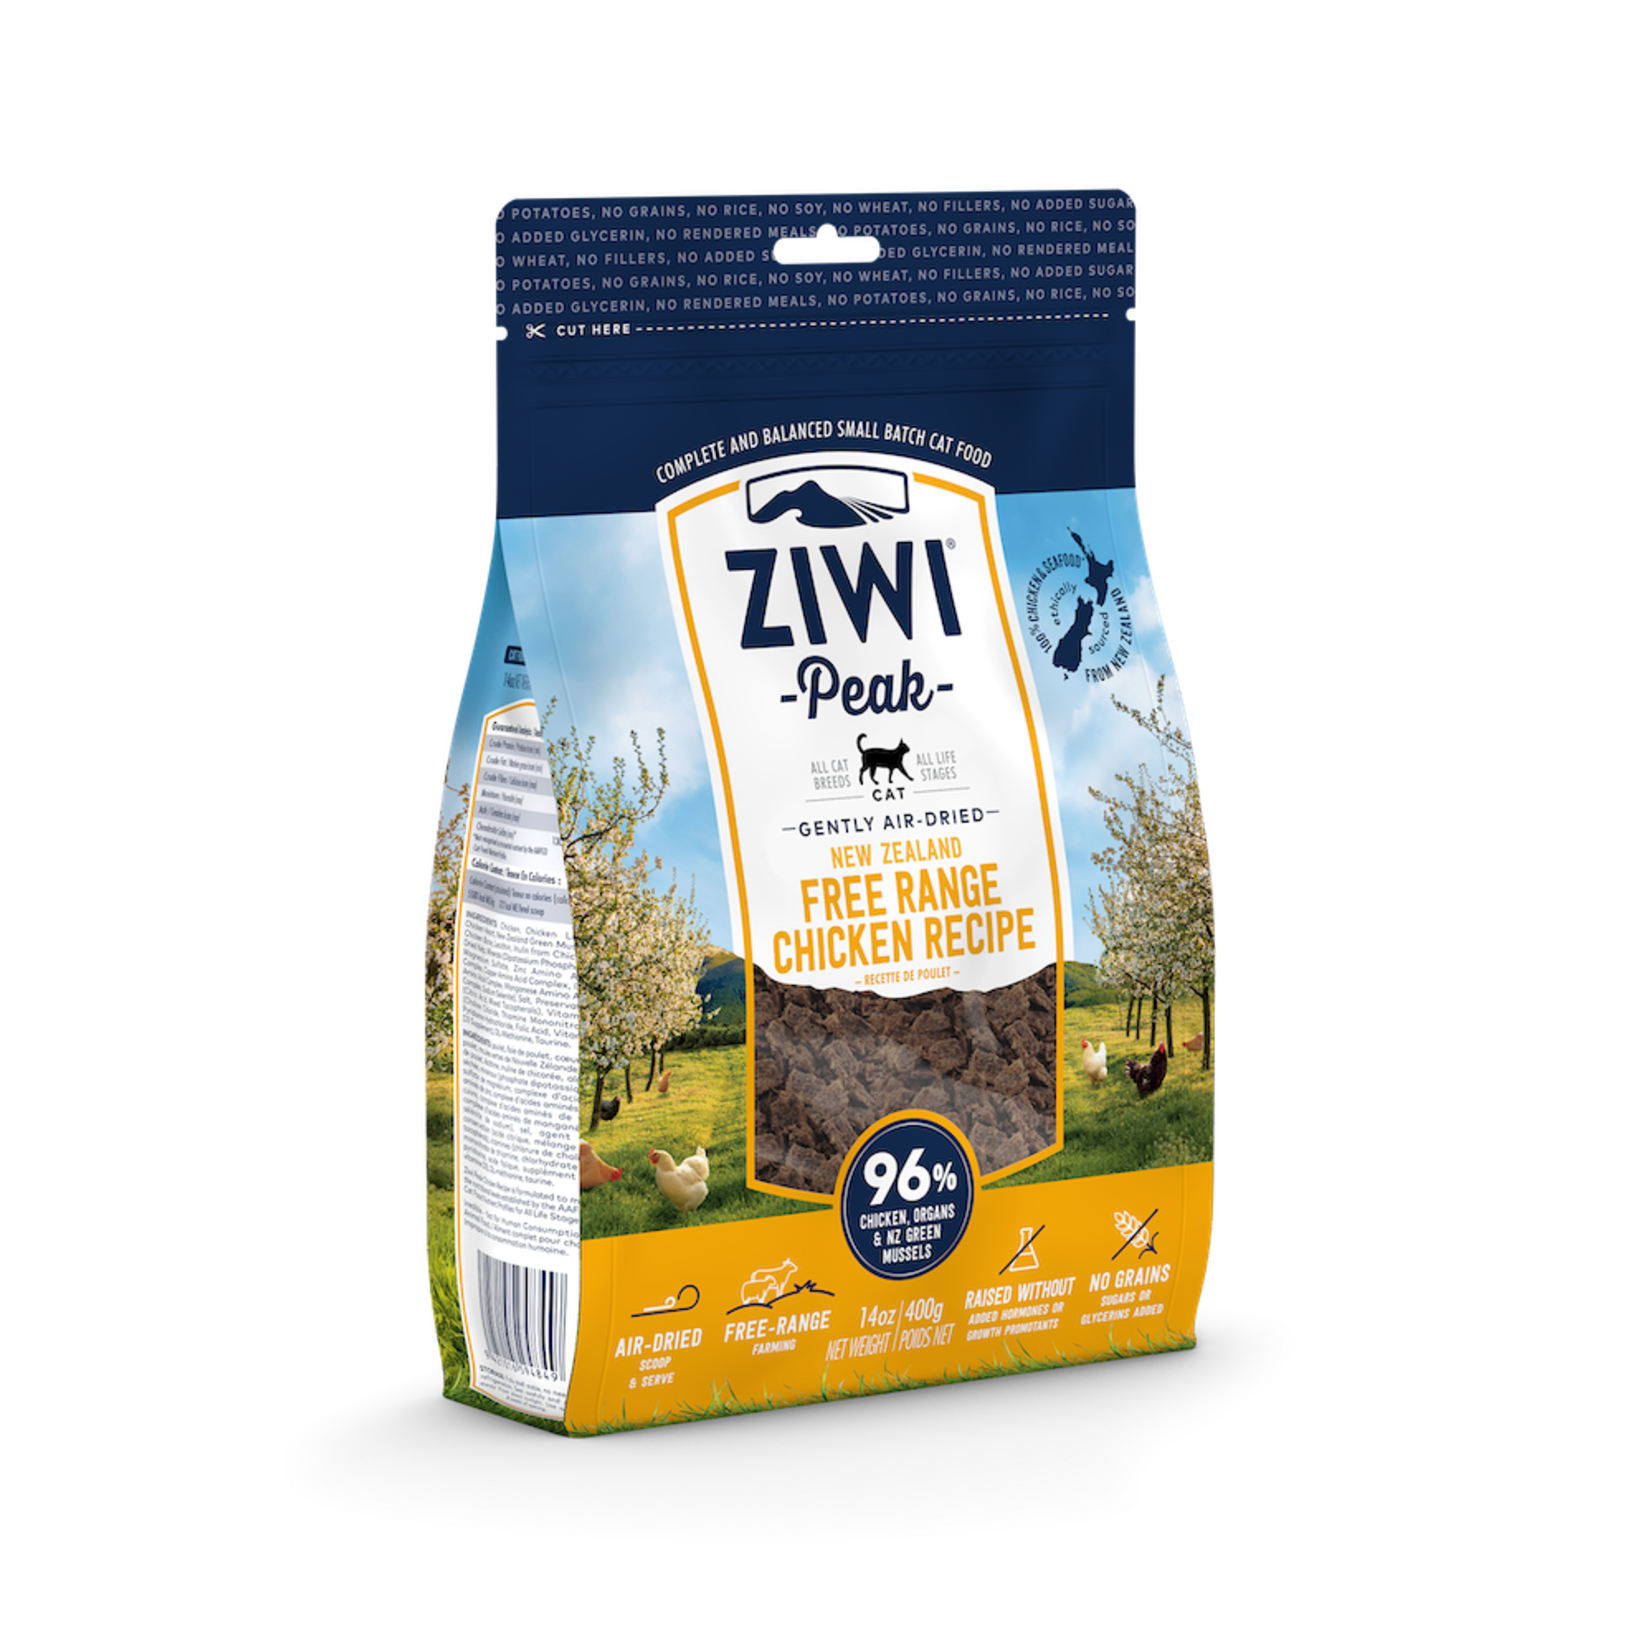 ZIWI Pets ZIWI Peak Original - Gently Air-Dried Chicken Recipe for Cats